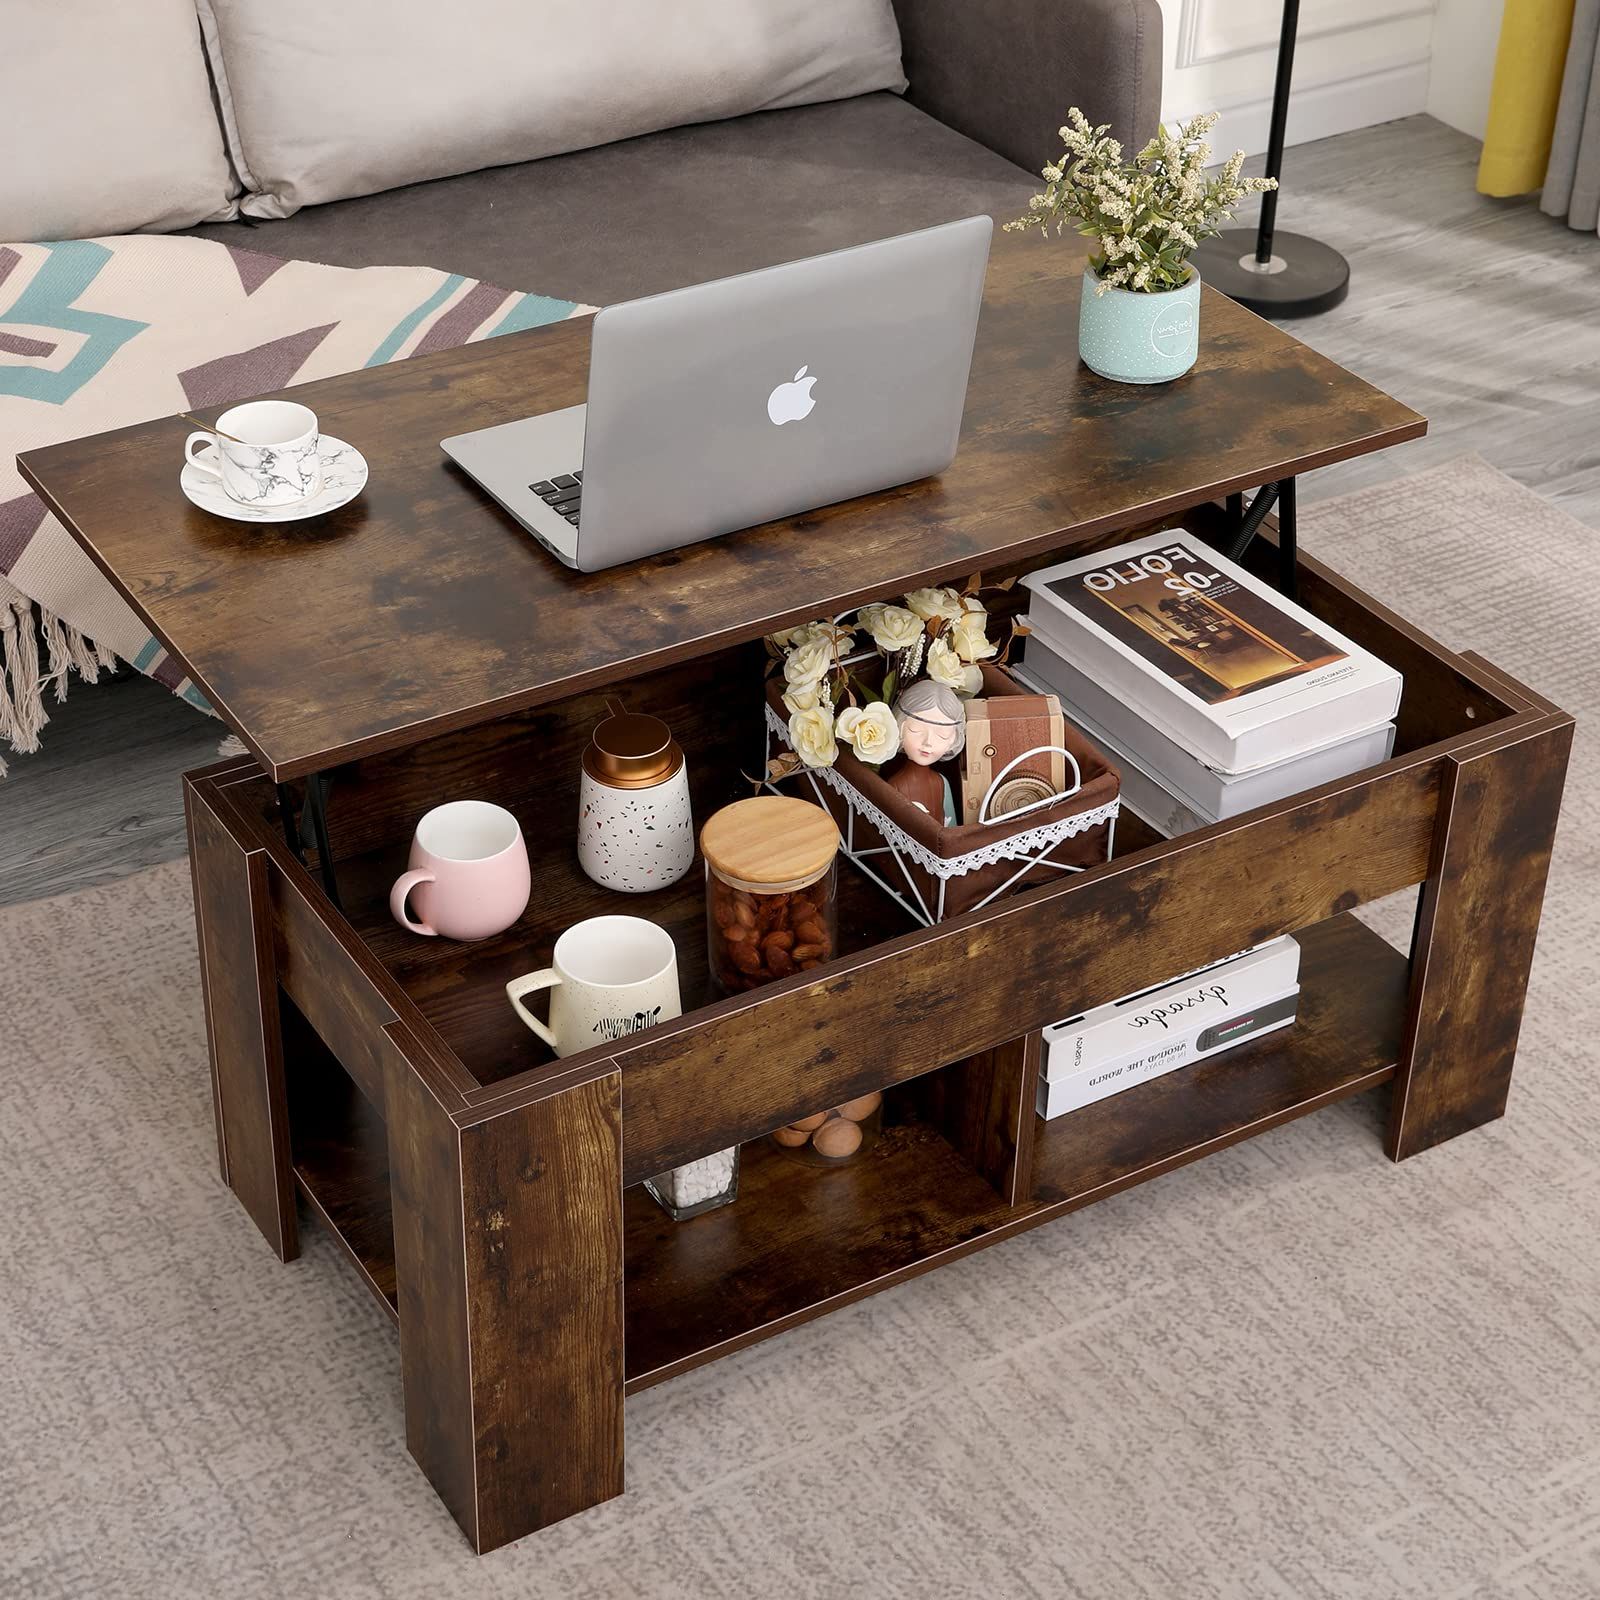 Lift Top Coffee Tables Regarding Well Known Lift Top Coffee Table With Storage, 2 Open Shelves And Hidden Compartment  Lifting Center Table, Modern Wood Coffee Tables For Living Room Reception  Room Office : Amazon.co.uk: Home & Kitchen (Photo 8 of 10)